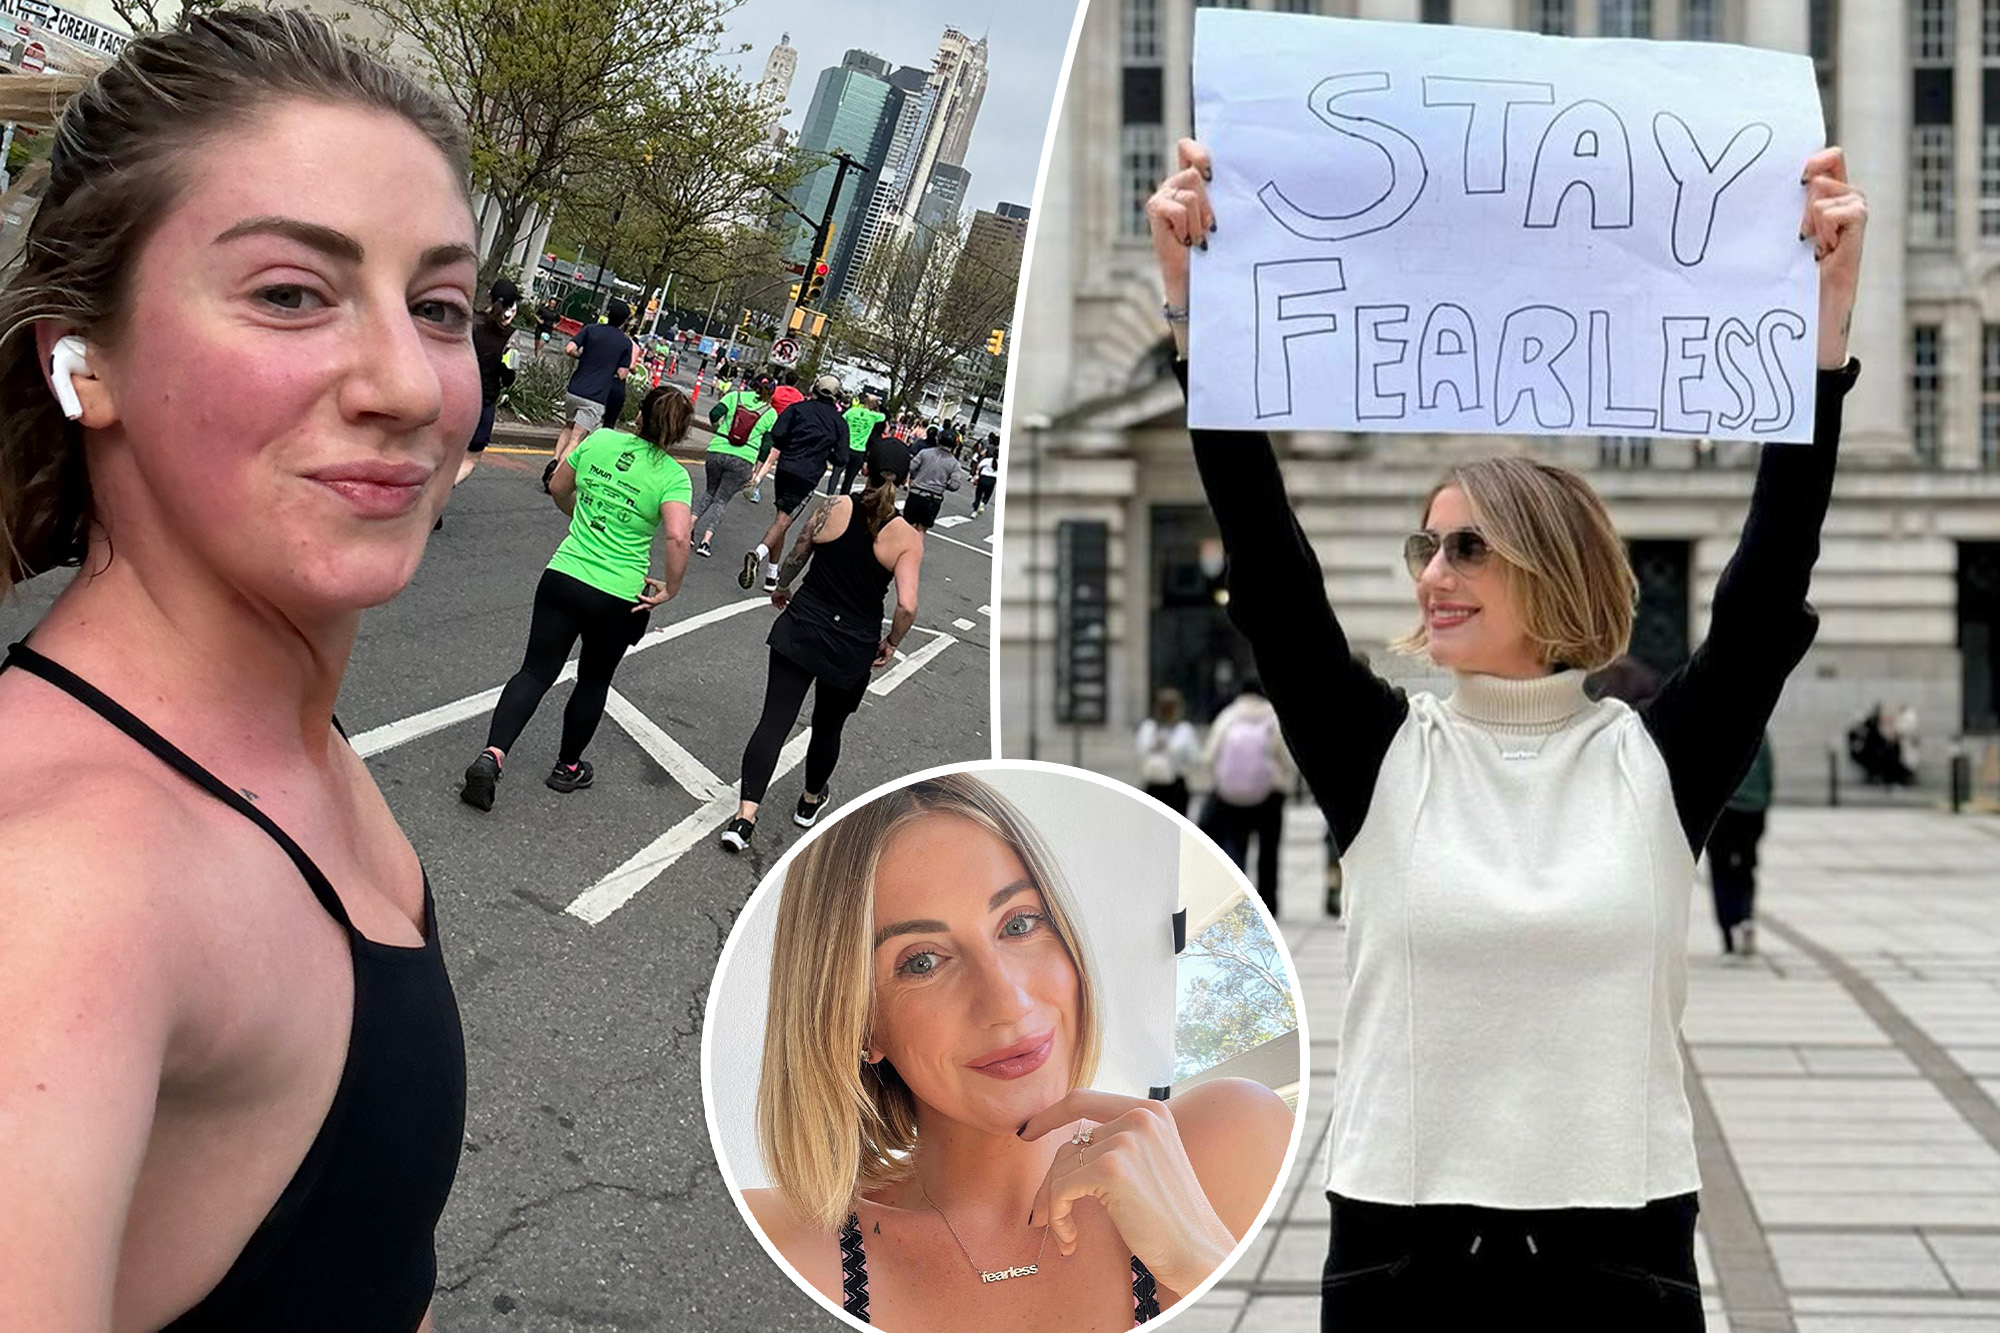 Influencer runs the Brooklyn Half Marathon without registering — then infuriates runners by bragging about her pace